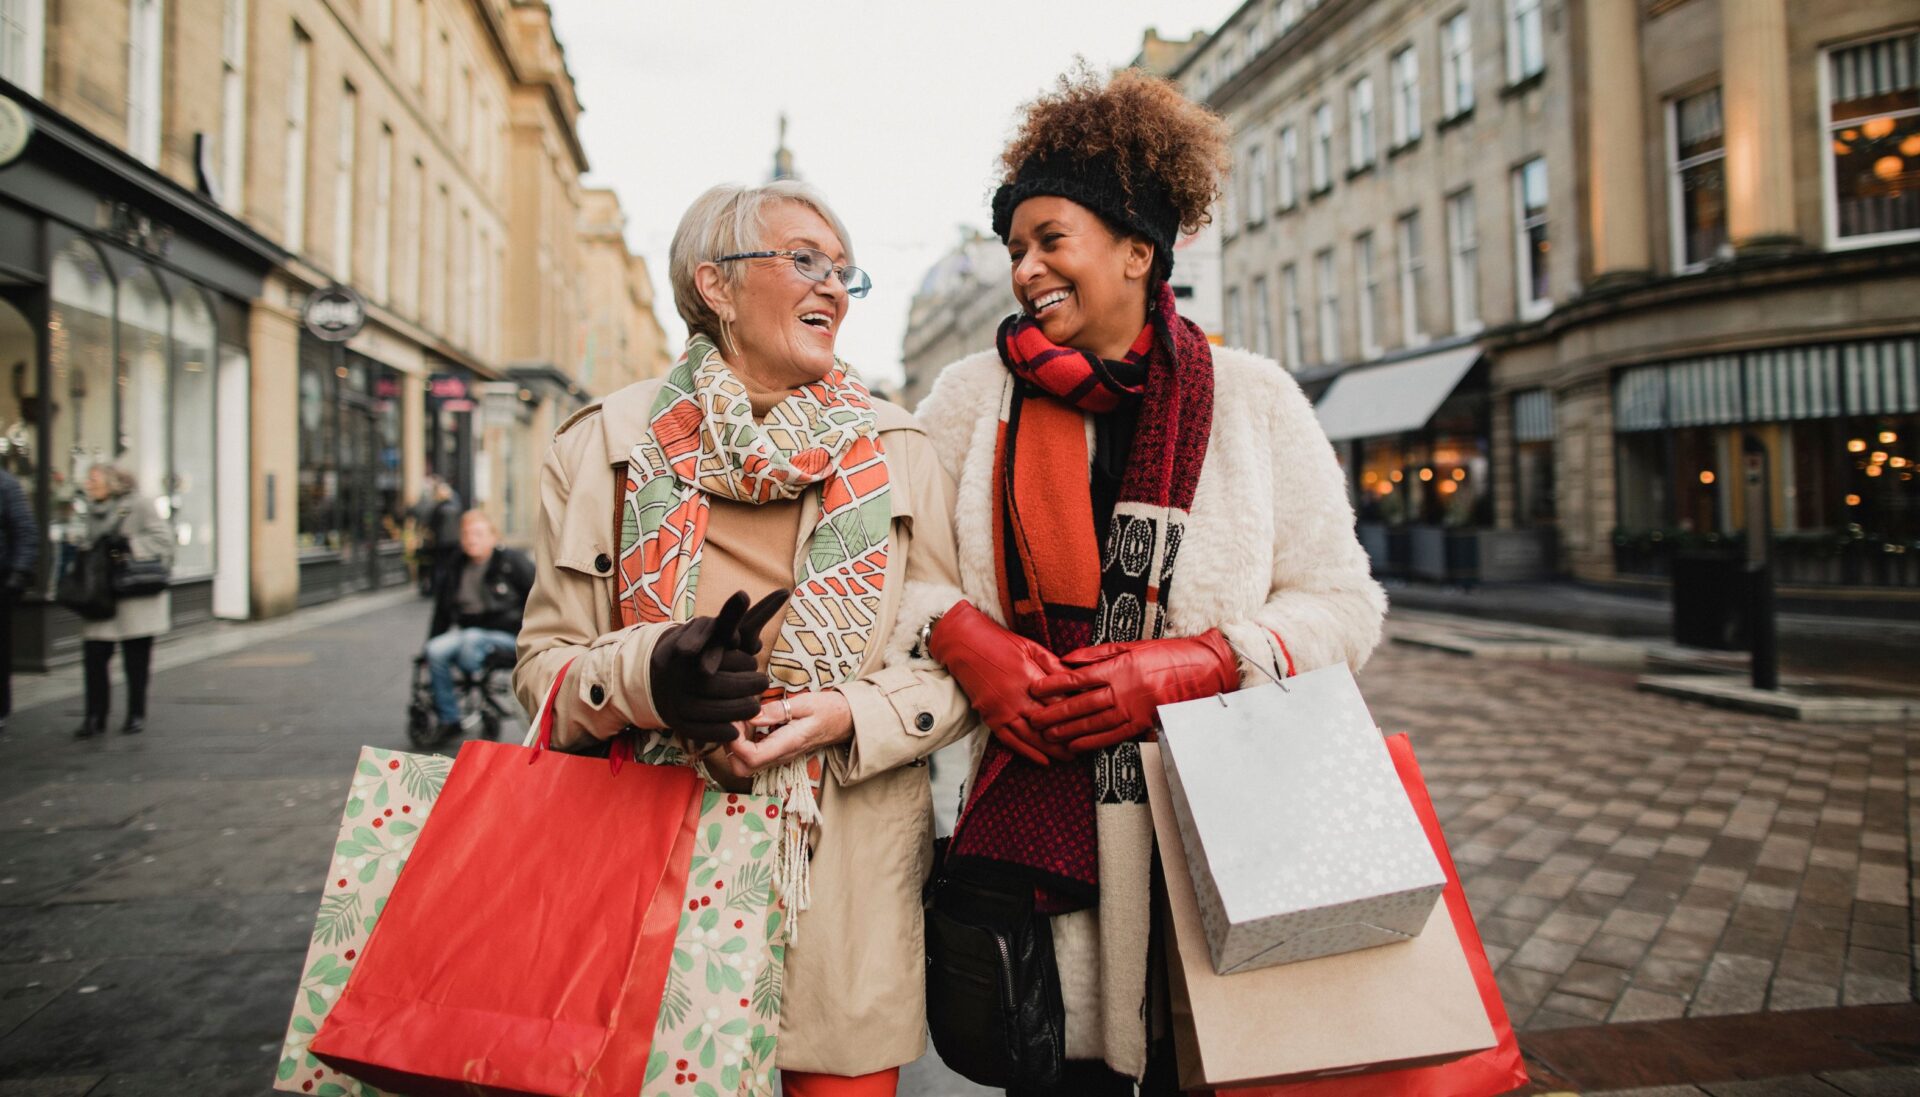 Two women with linked arms and dressed in reds and golds walking down a high street and laughing as they clutch Christmas bags of shopping